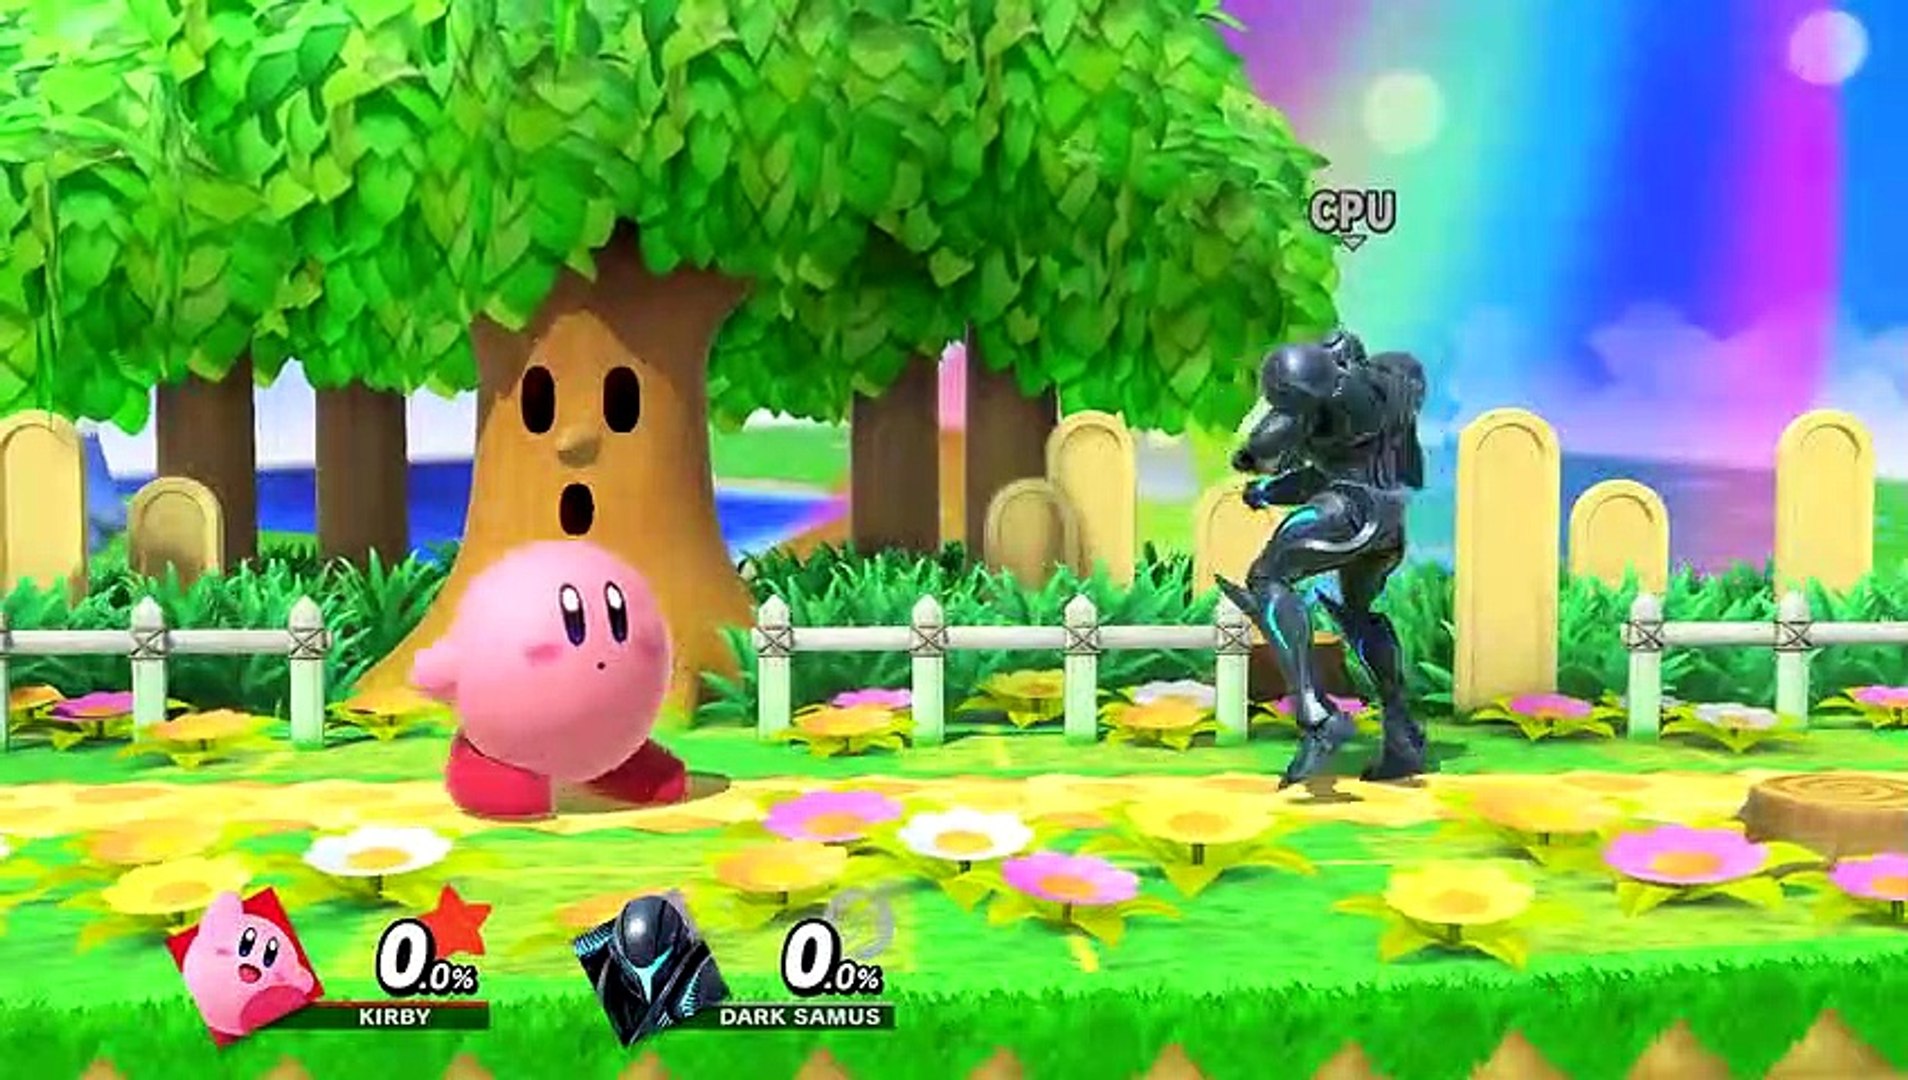 All Kirby Transformations in Super Smash Bros. Ultimate - Dailymotion Video